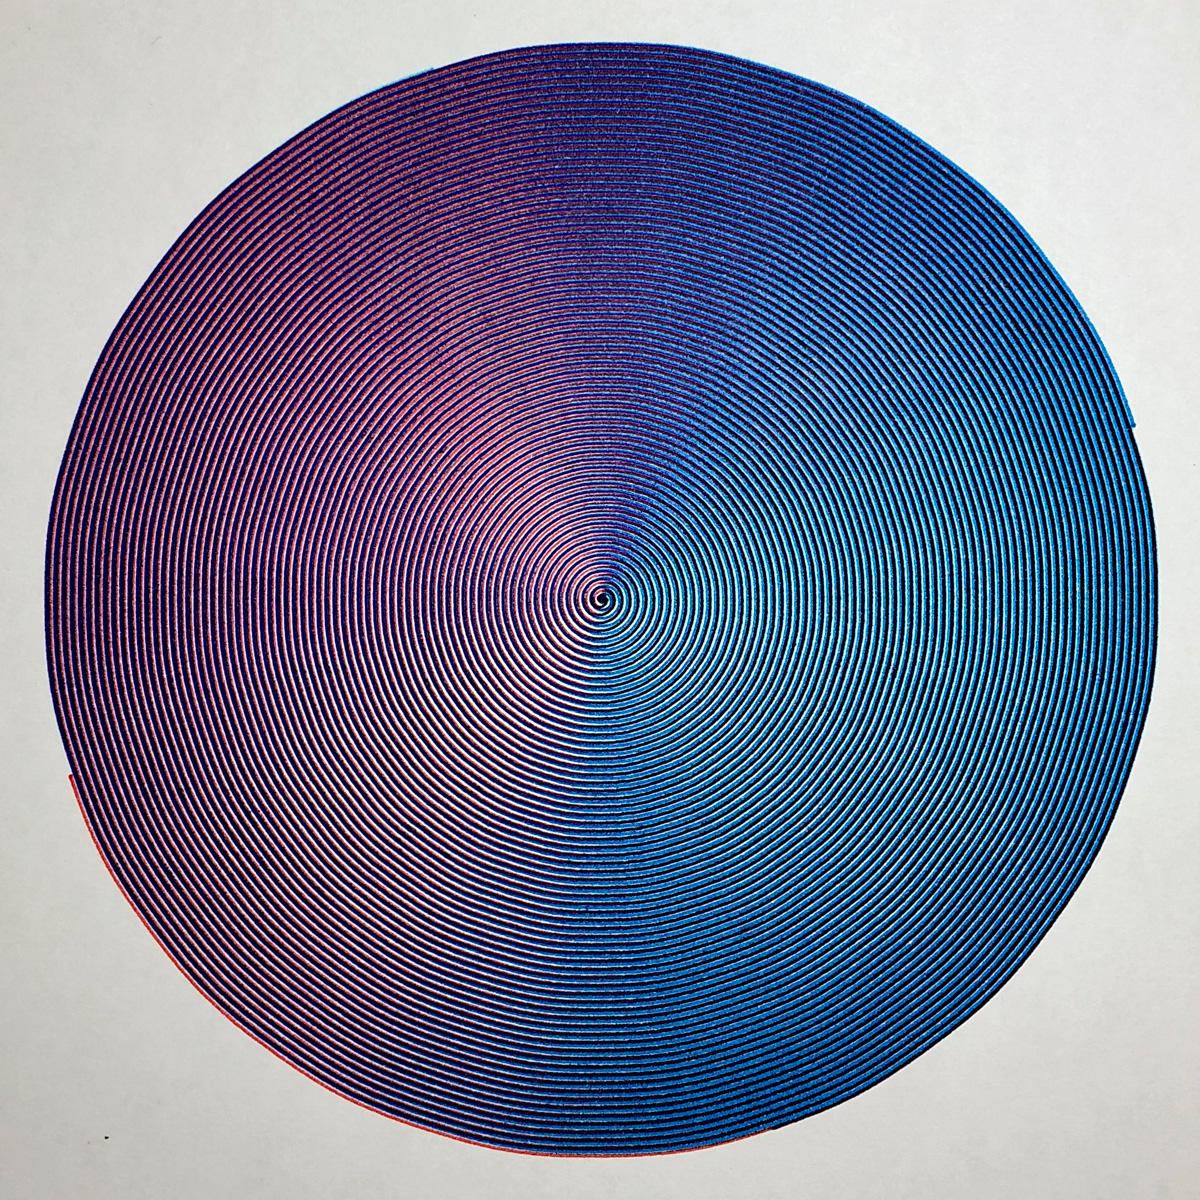 A circular shape made of four tightly-wound coloured spirals. The overall colour is a purple to blue gradient from left to right